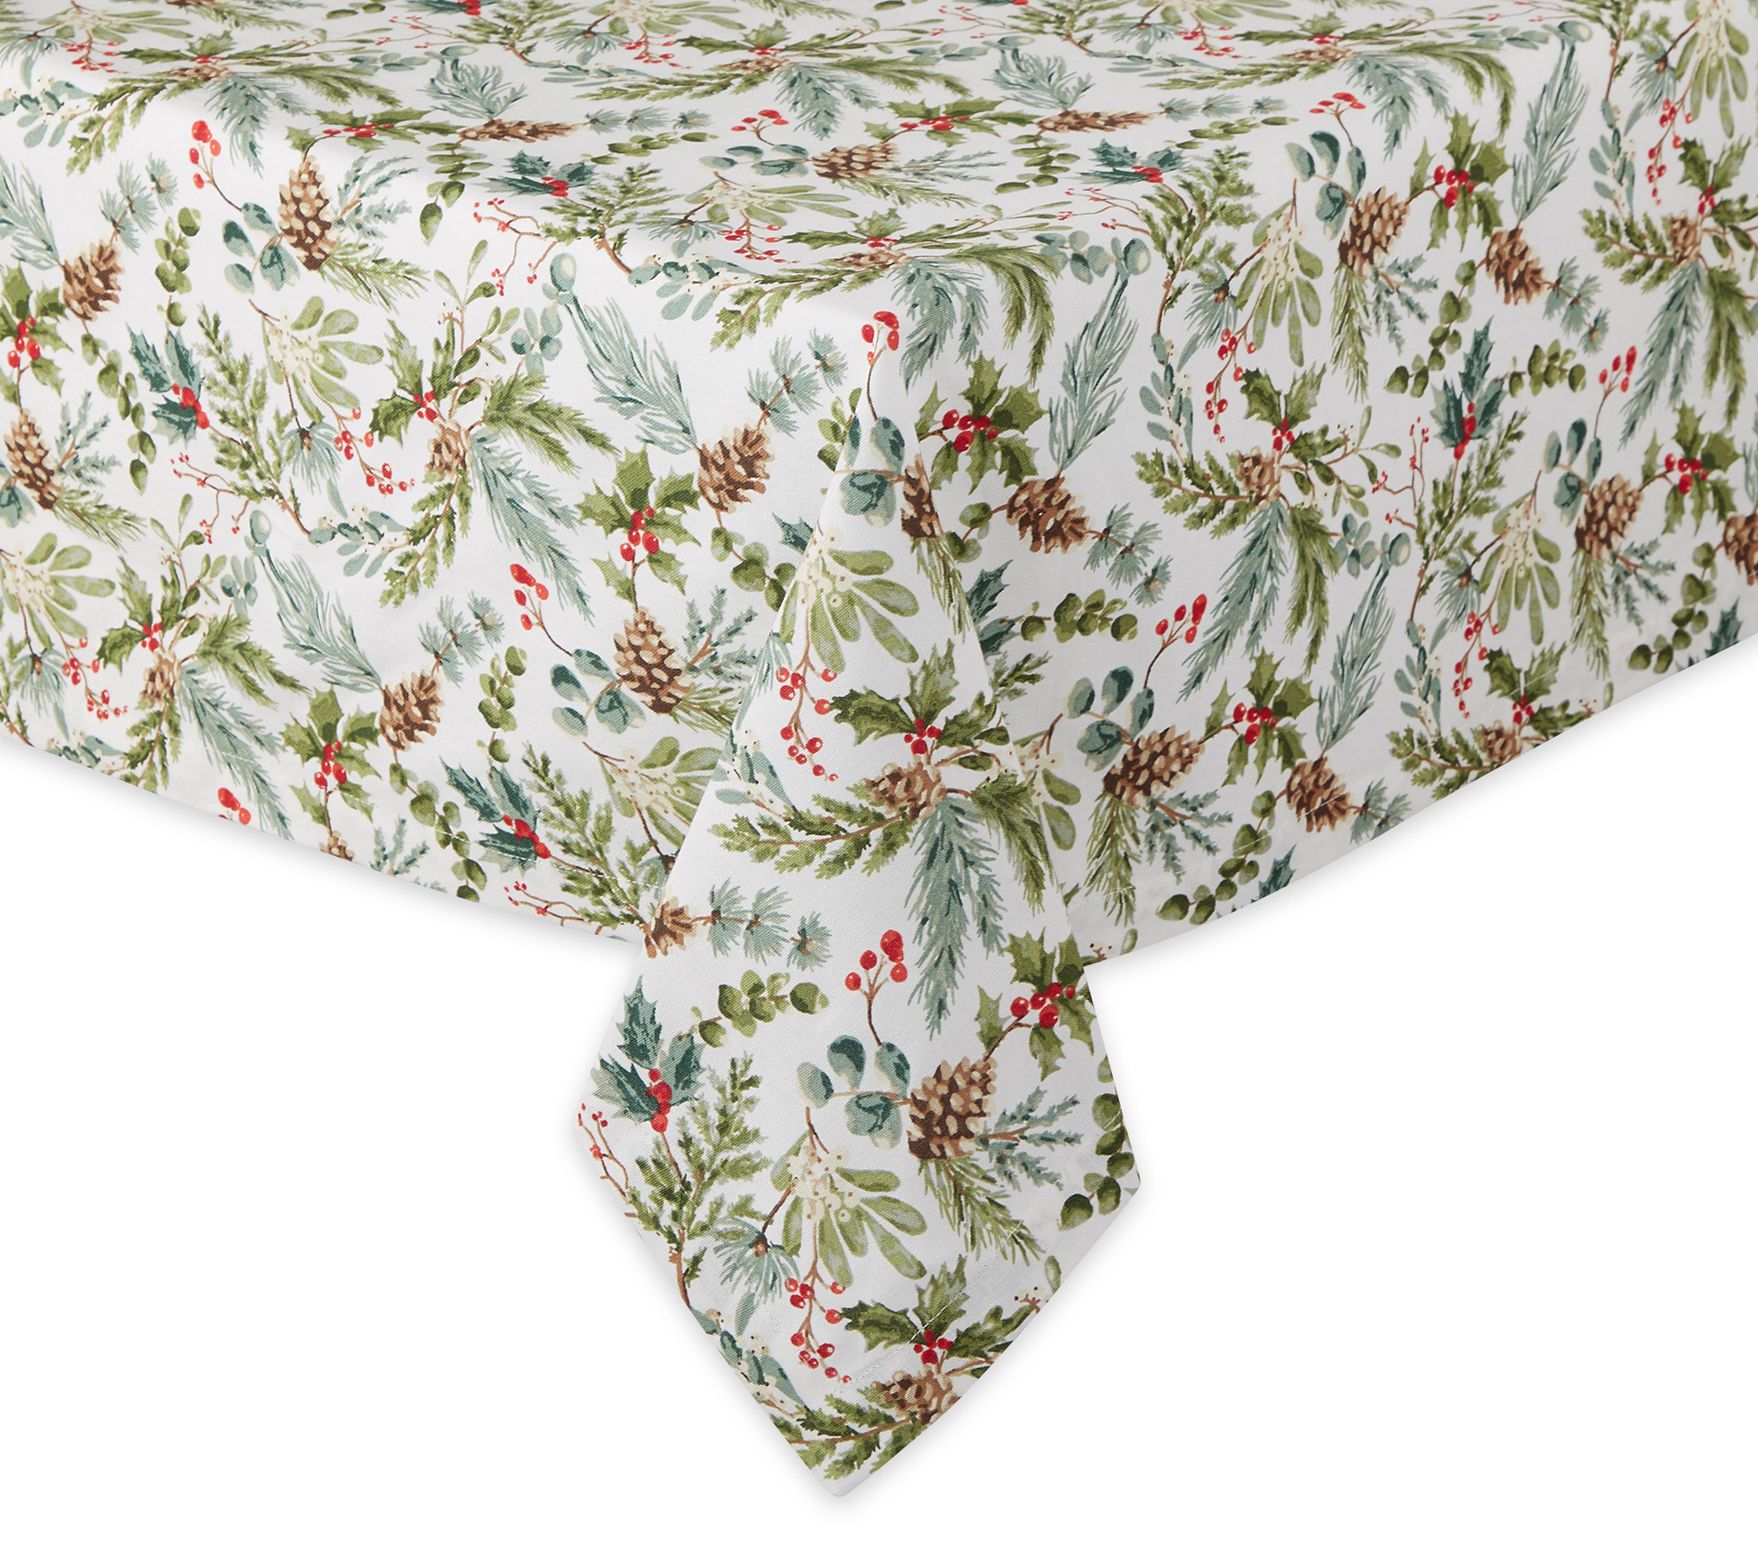 Design Imports Heritage Holiday Sprigs Tablecloth 52x52 - QVC.com